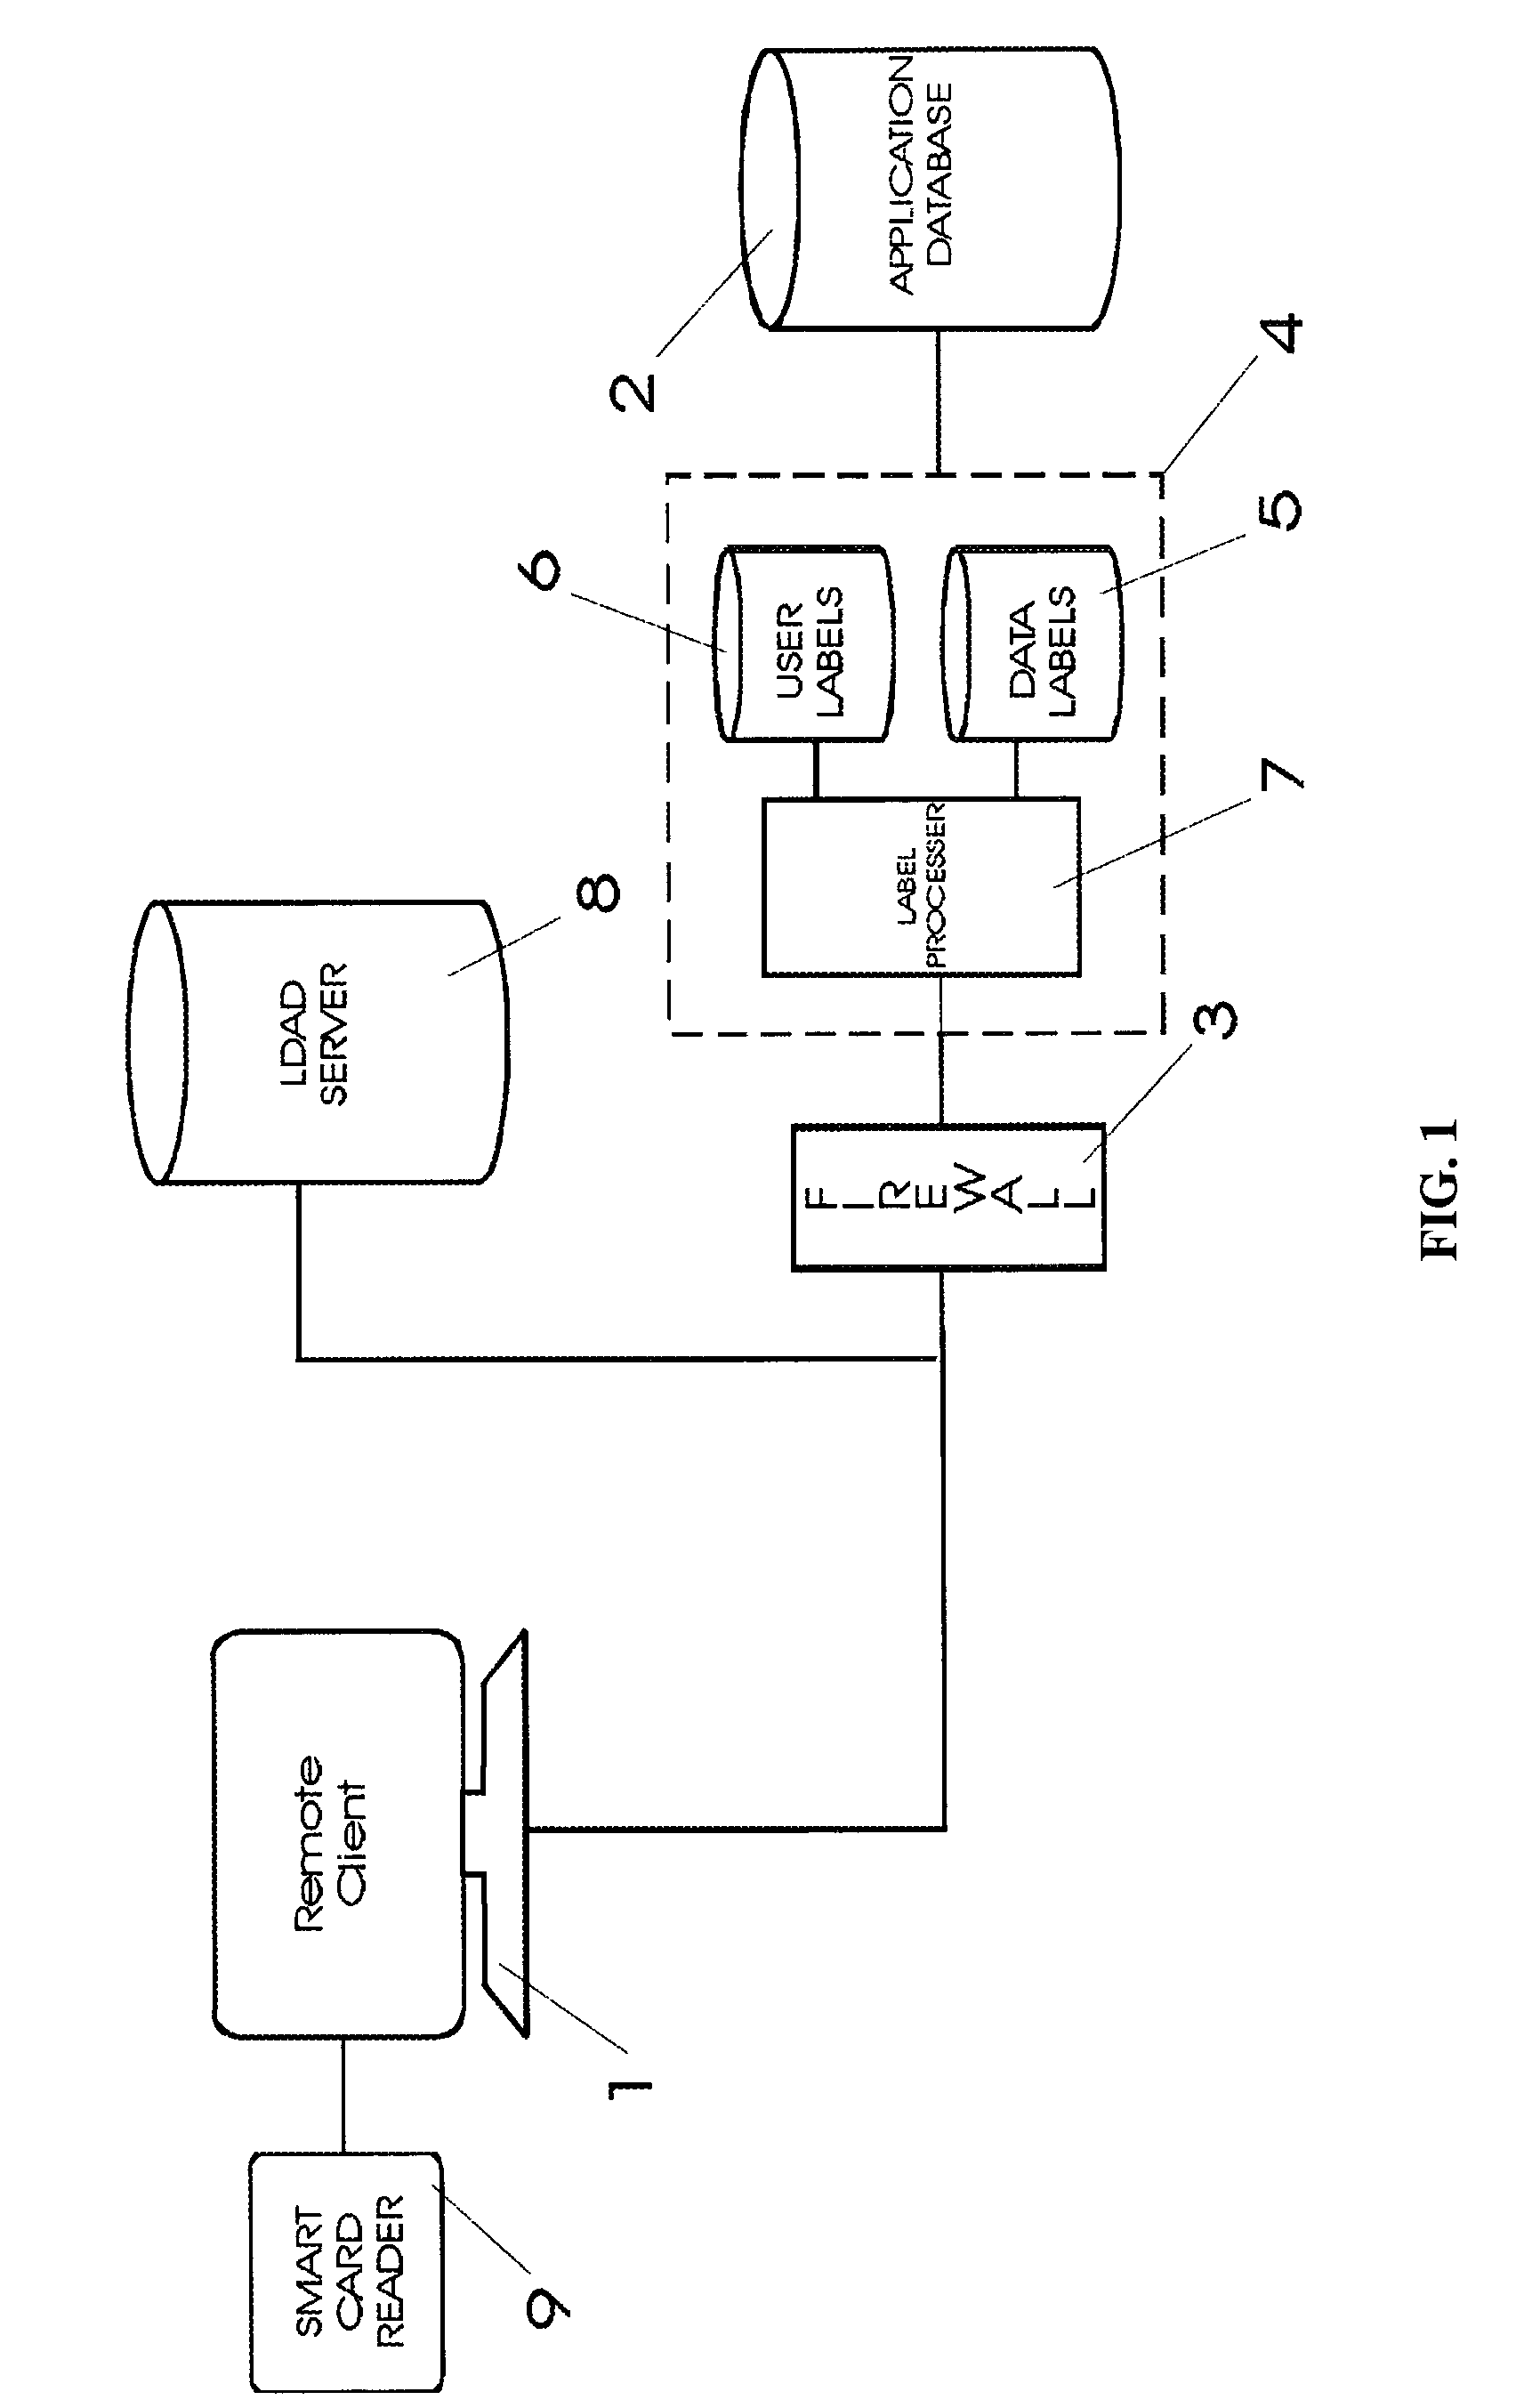 Multi-level and multi-category data labeling system